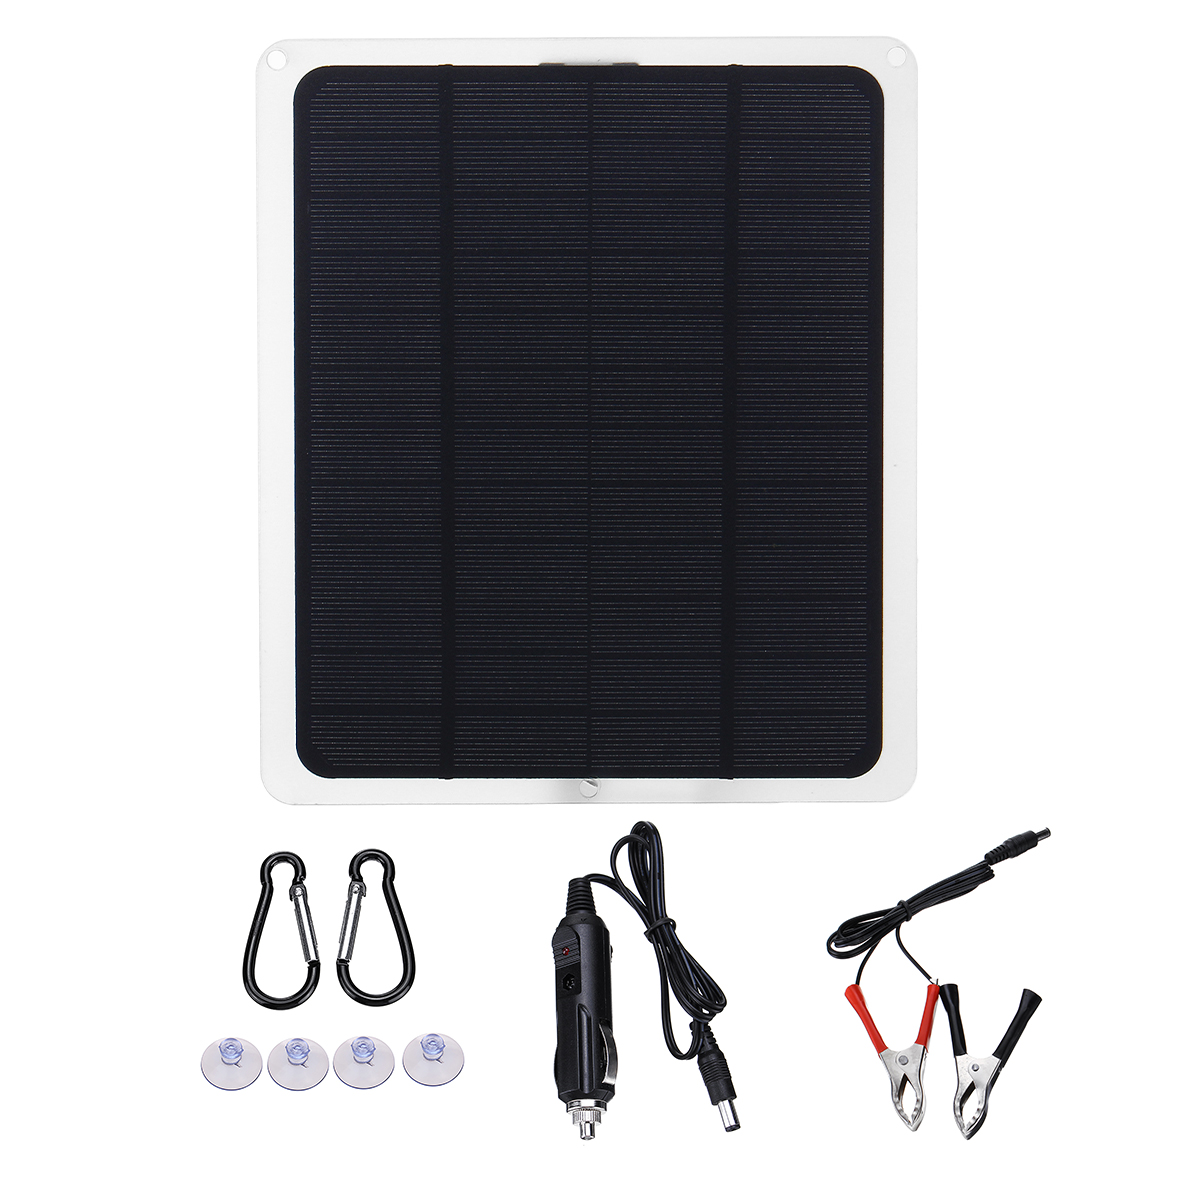 

10W Monocrystalline Solar Panel Battery Charger with 5v Single USB Interface